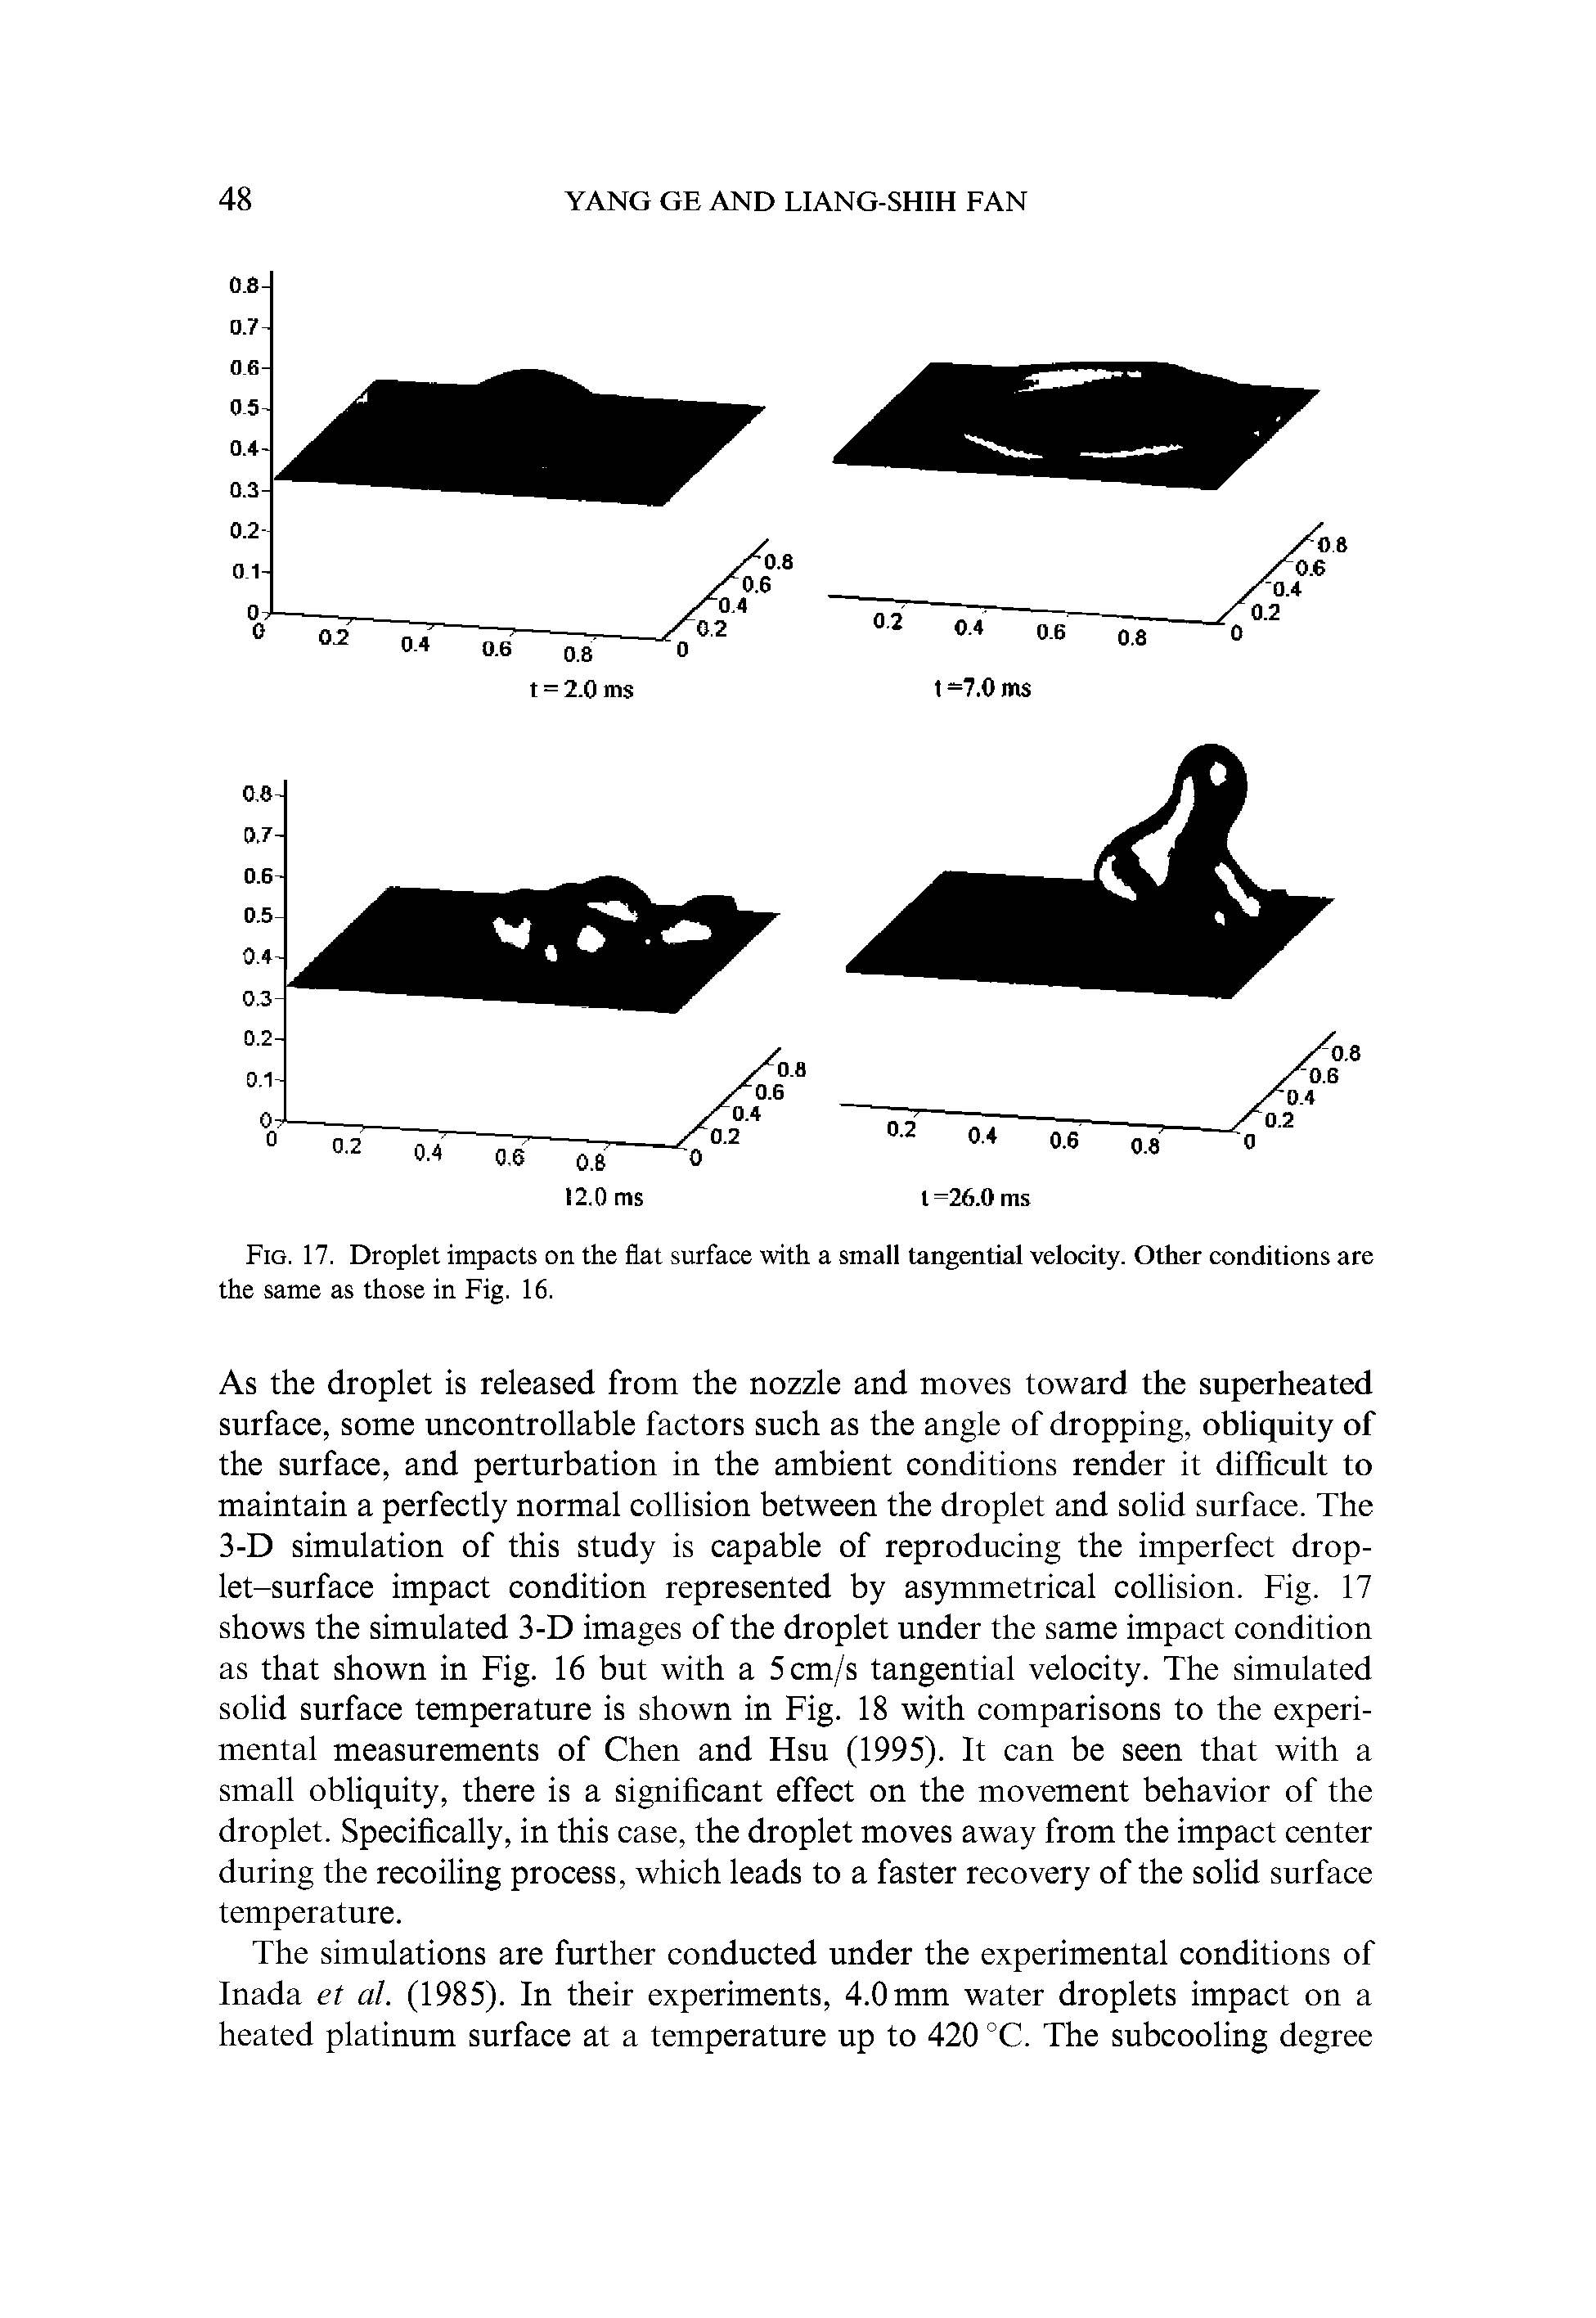 Fig. 17. Droplet impacts on the flat surface with a small tangential velocity. Other conditions are the same as those in Fig. 16.